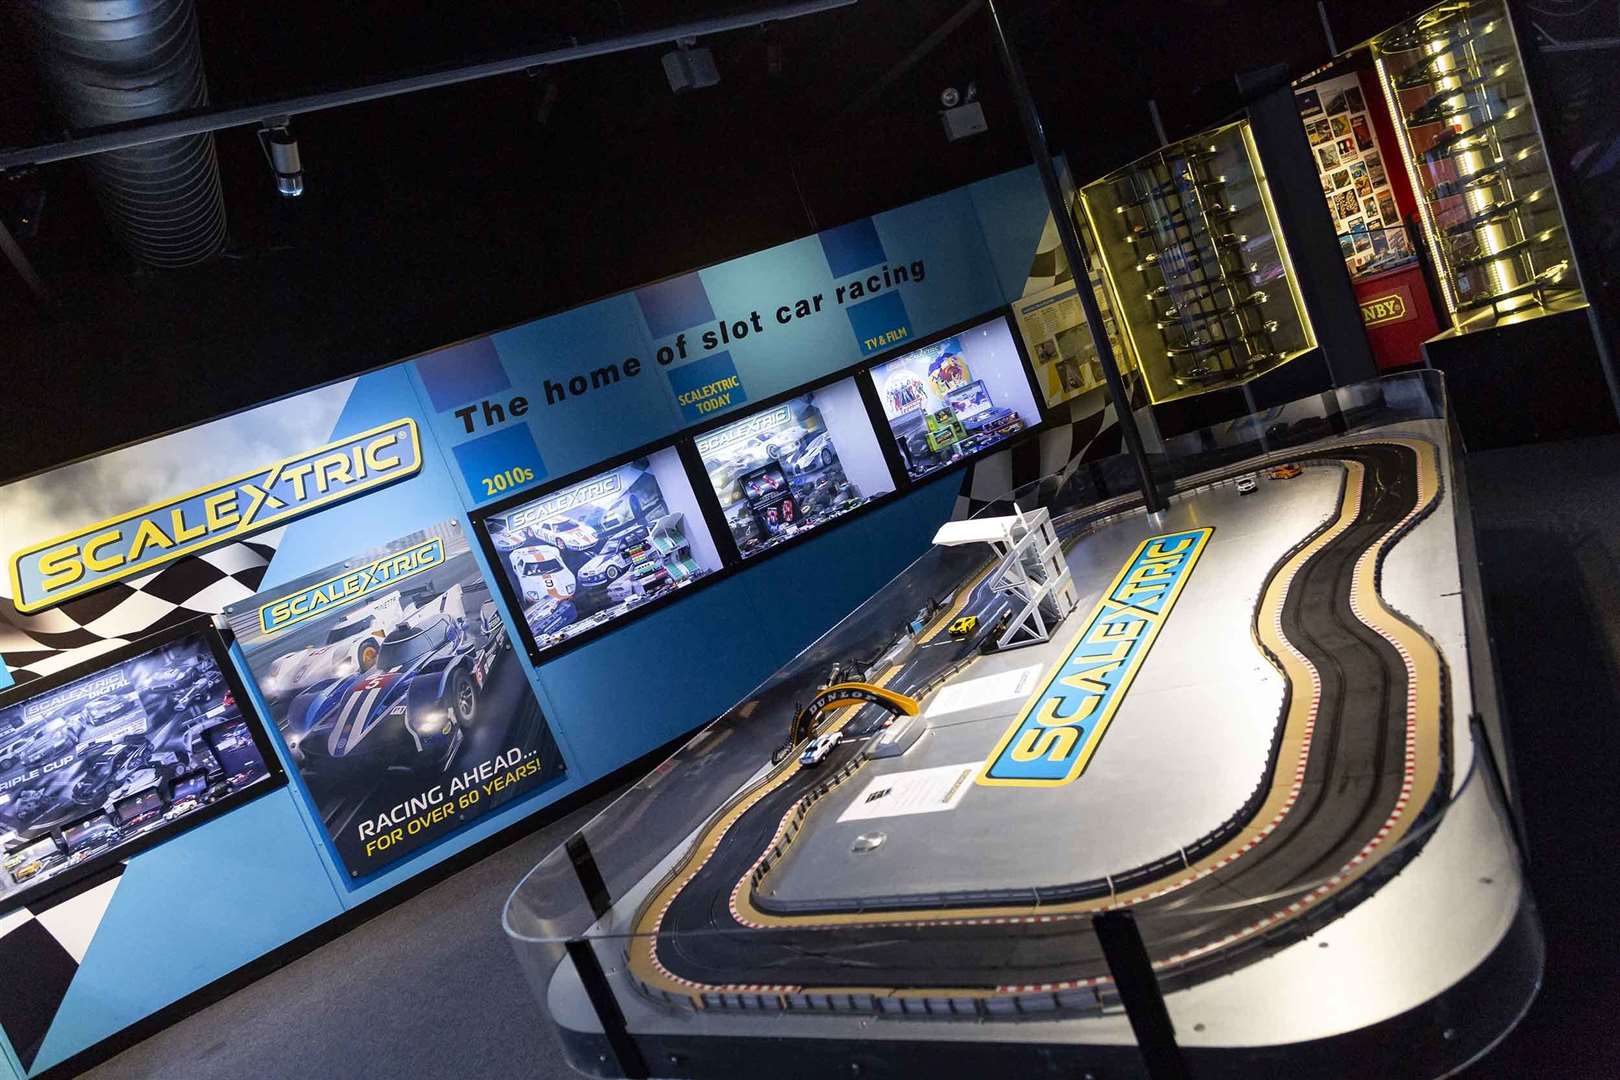 Scalextric will be on display